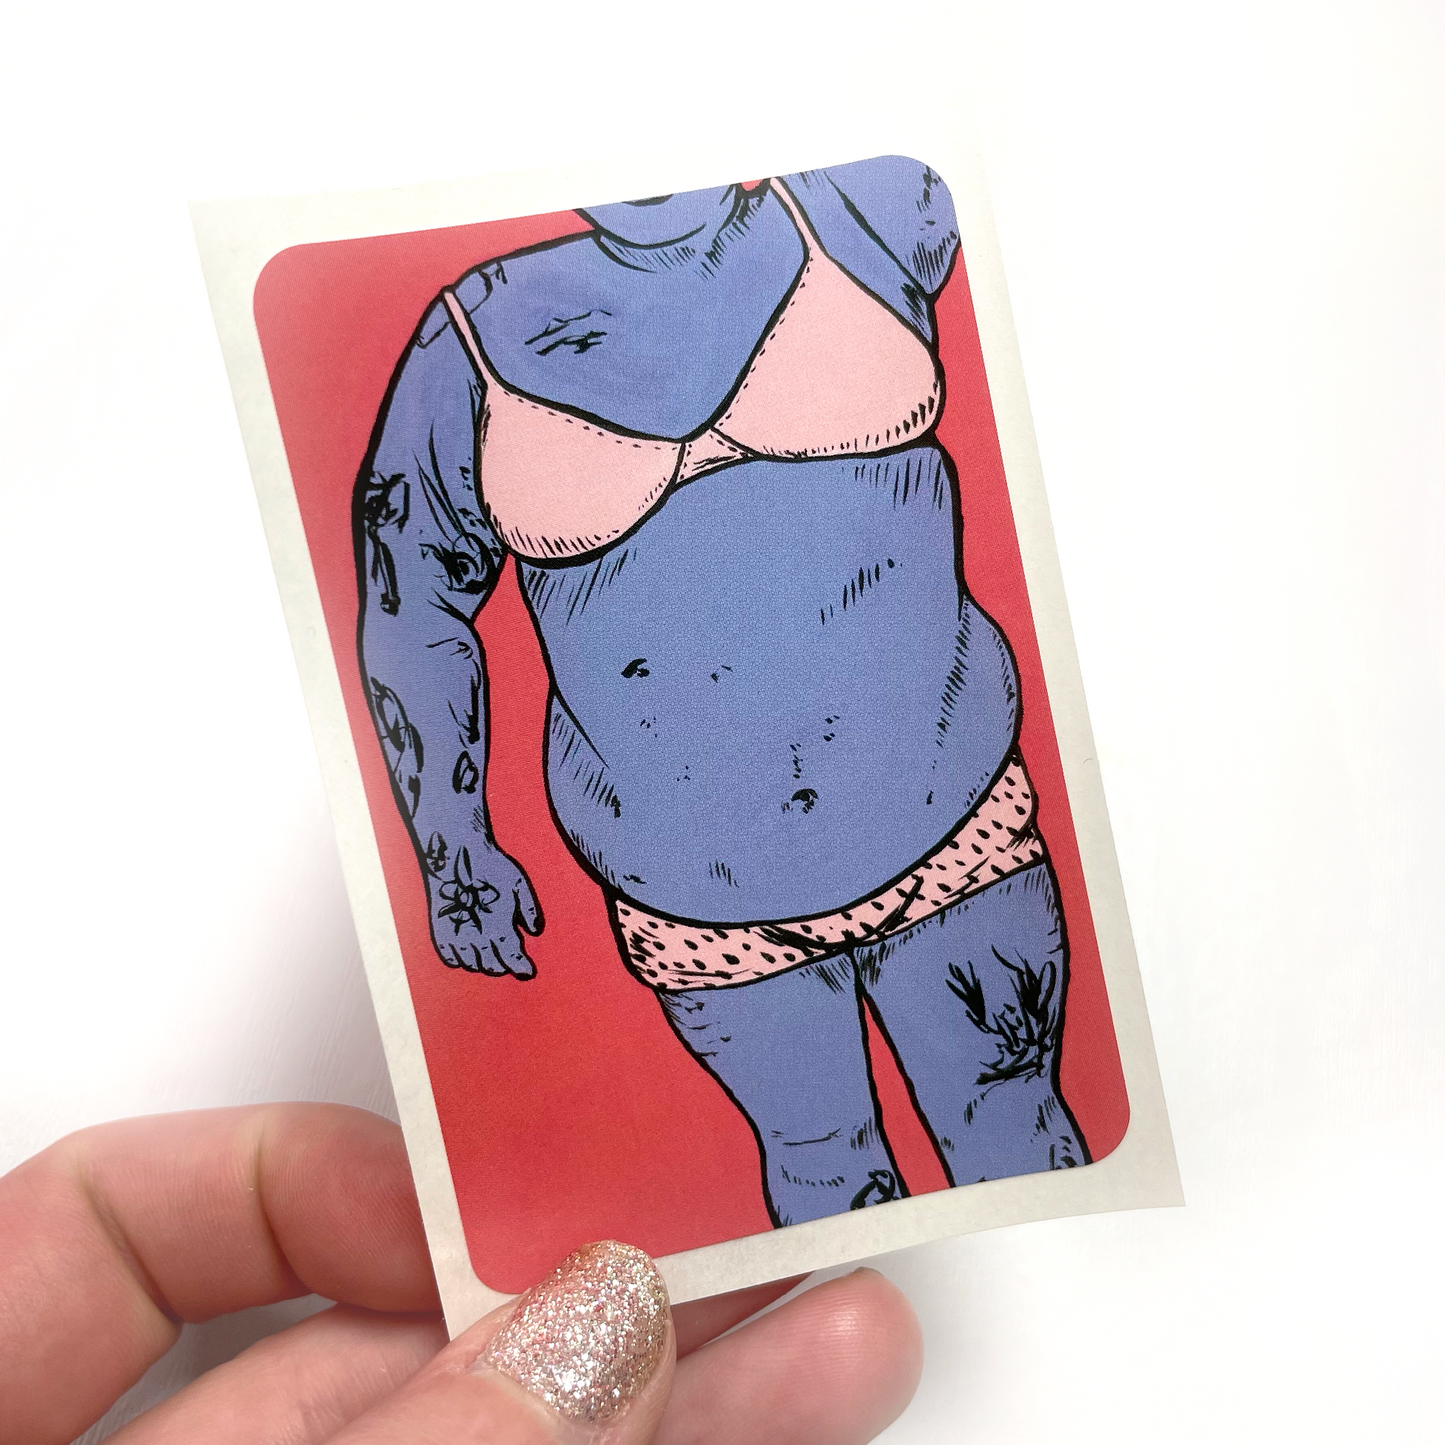 Body Project Stickers